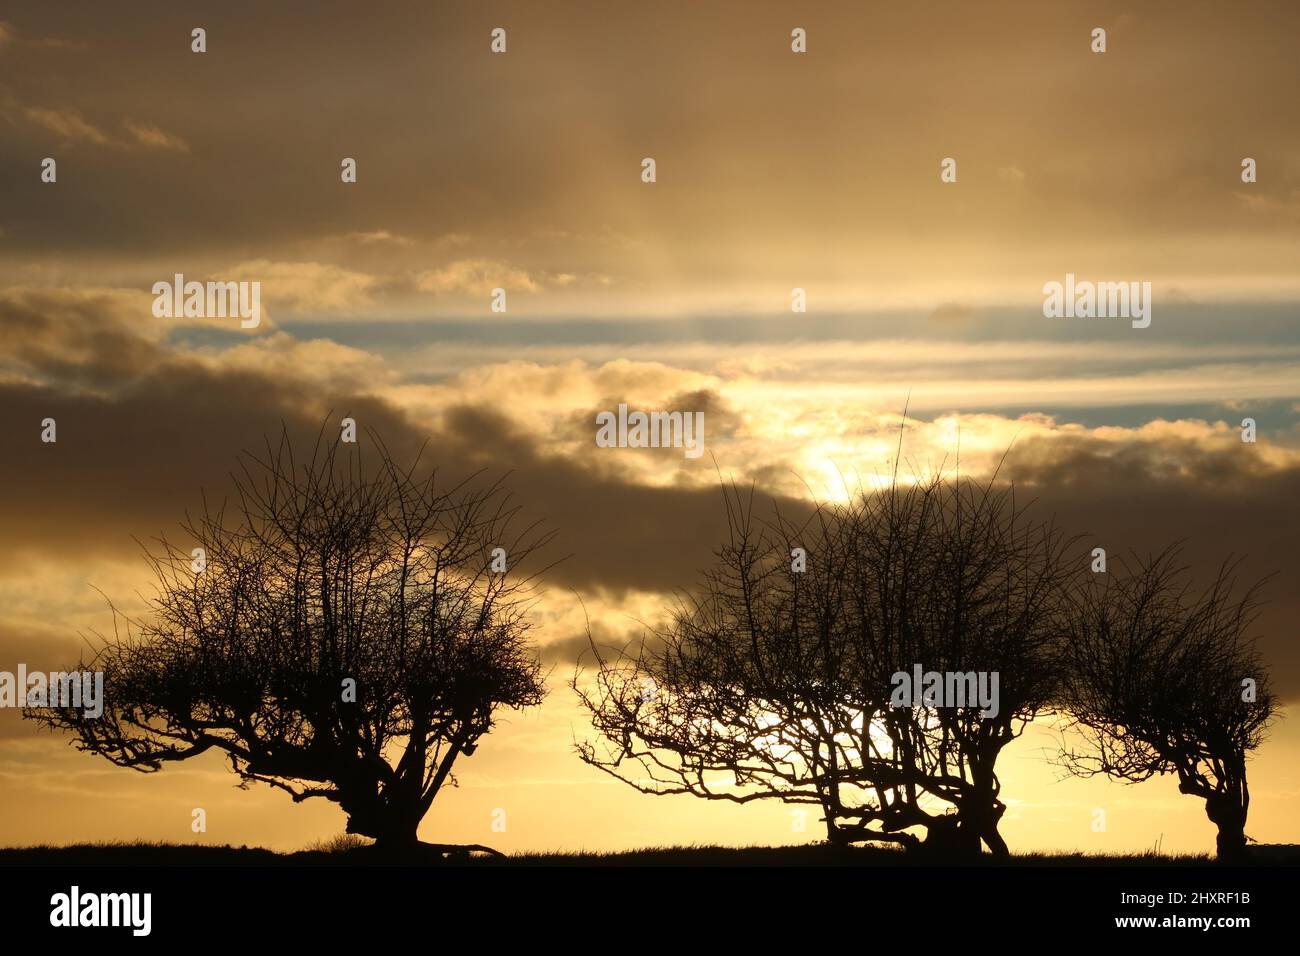 Silhouettes of hawthorn trees at sundown with golden sunset coloured clouds in an evening sky. Stock Photo